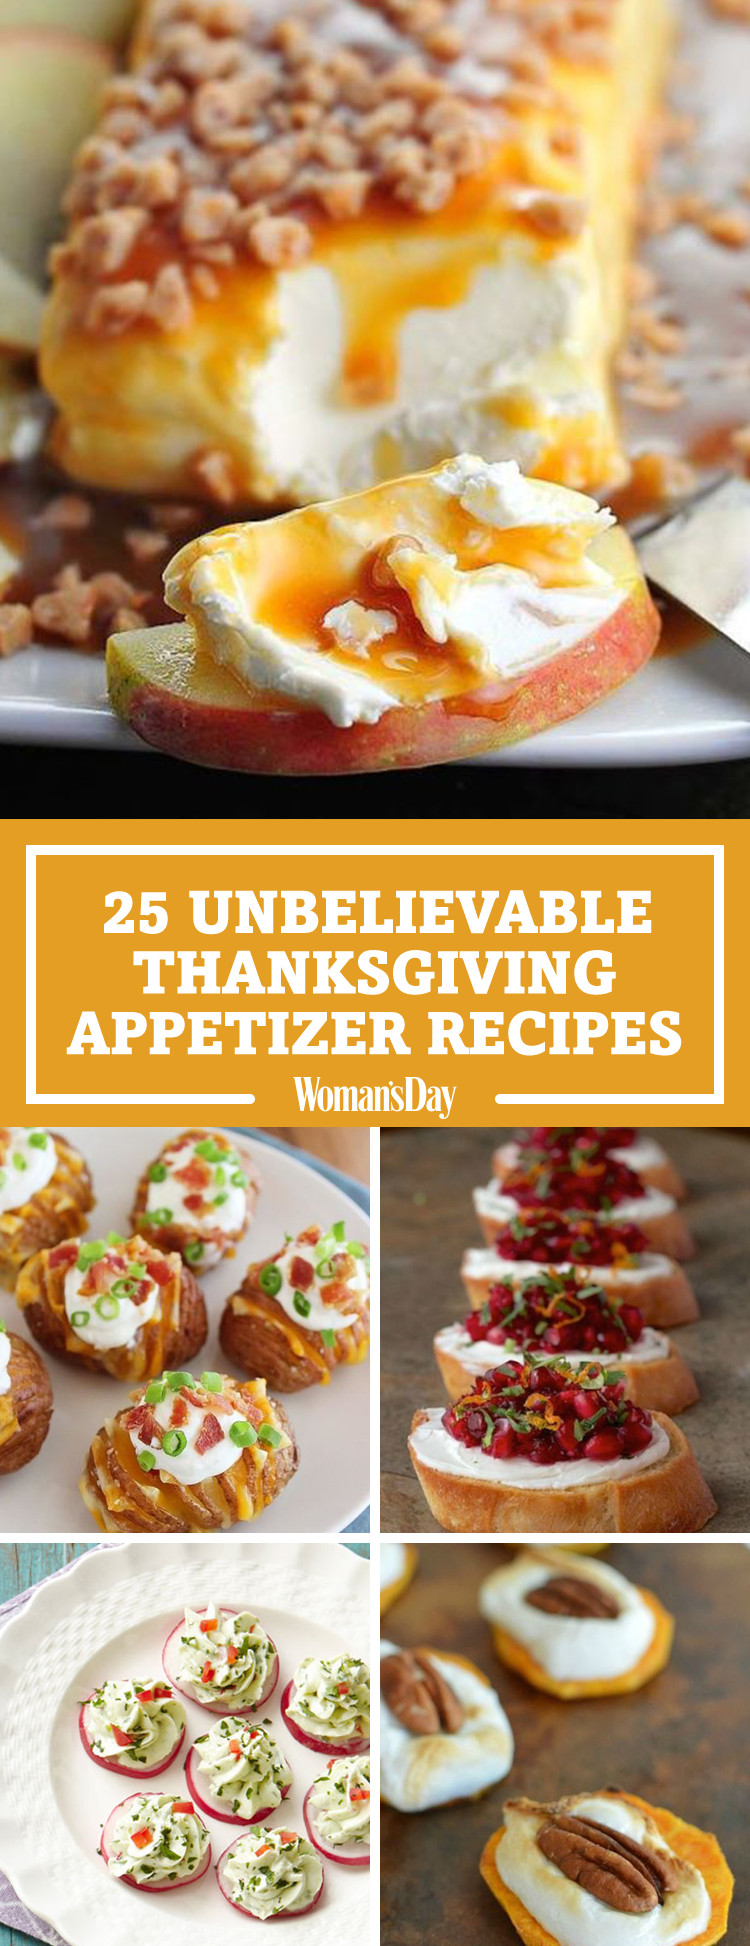 Thanksgiving Recipe Pinterest
 34 Easy Thanksgiving Appetizers Best Recipes for